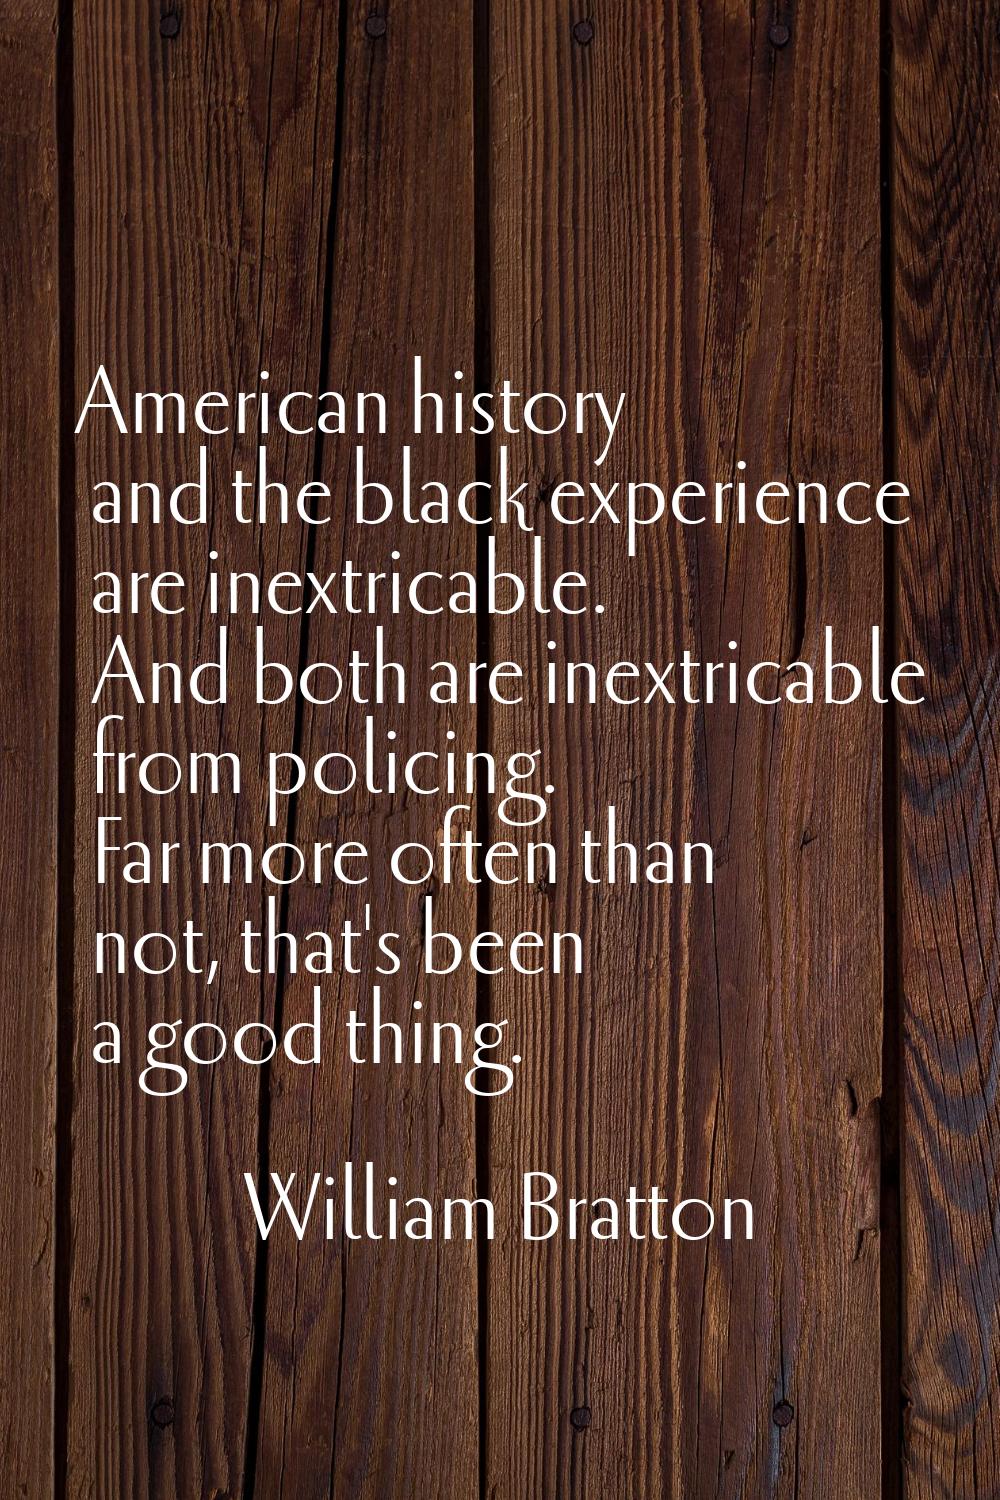 American history and the black experience are inextricable. And both are inextricable from policing